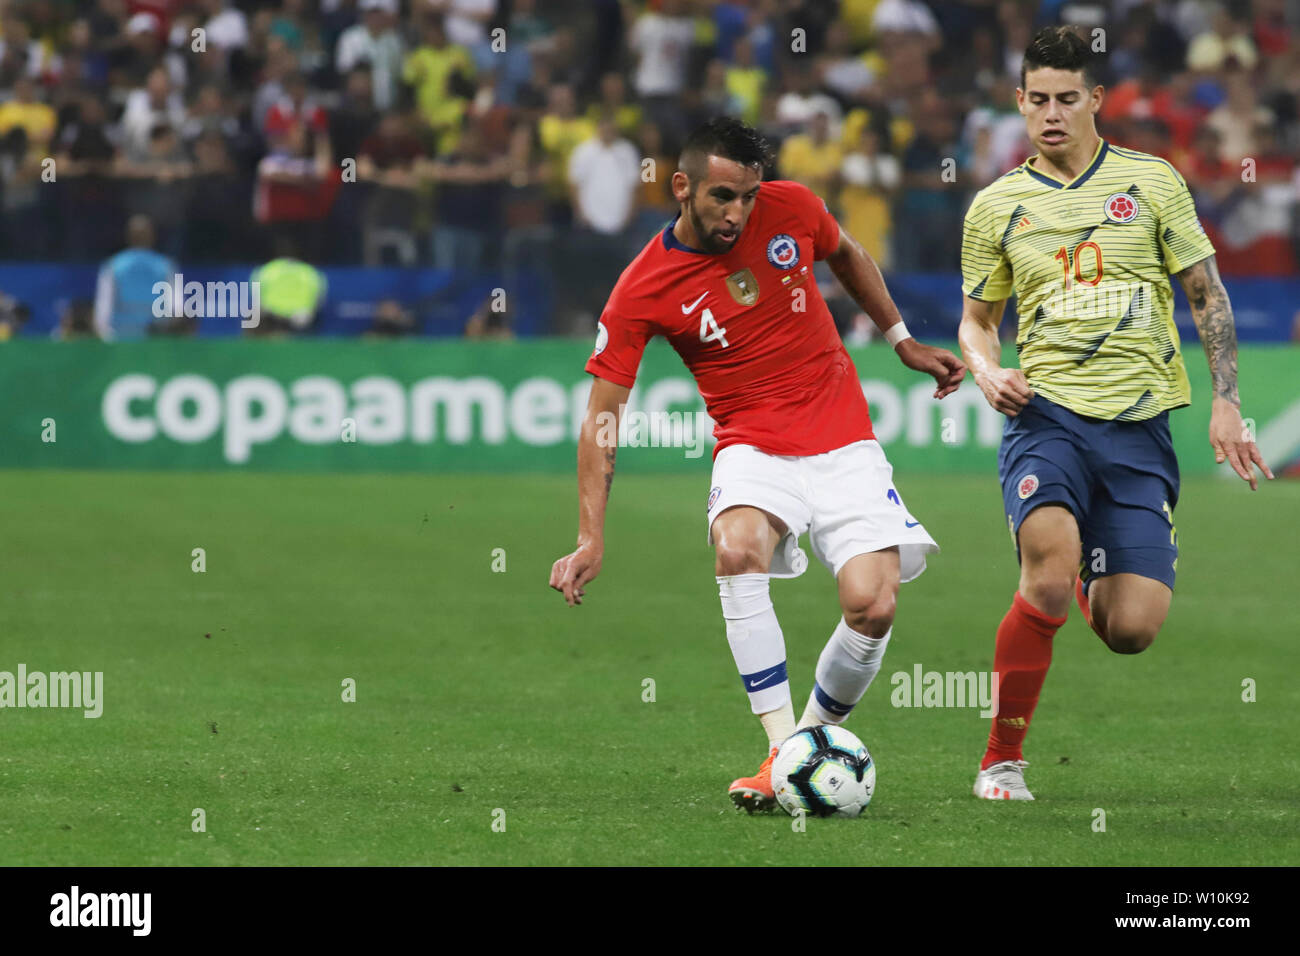 Sao Paulo, Brazil. 28th June, 2019. Chile's Mauricio Isla (L) vies with James Rodriguez of Colombia during the Copa America 2019 quarterfinal match between Chile and Colombia, in Sao Paulo, Brazil, June 28, 2019. Chile won 5-4 in penalty shoot-out. Credit: Rahel Patrasso/Xinhua/Alamy Live News Stock Photo